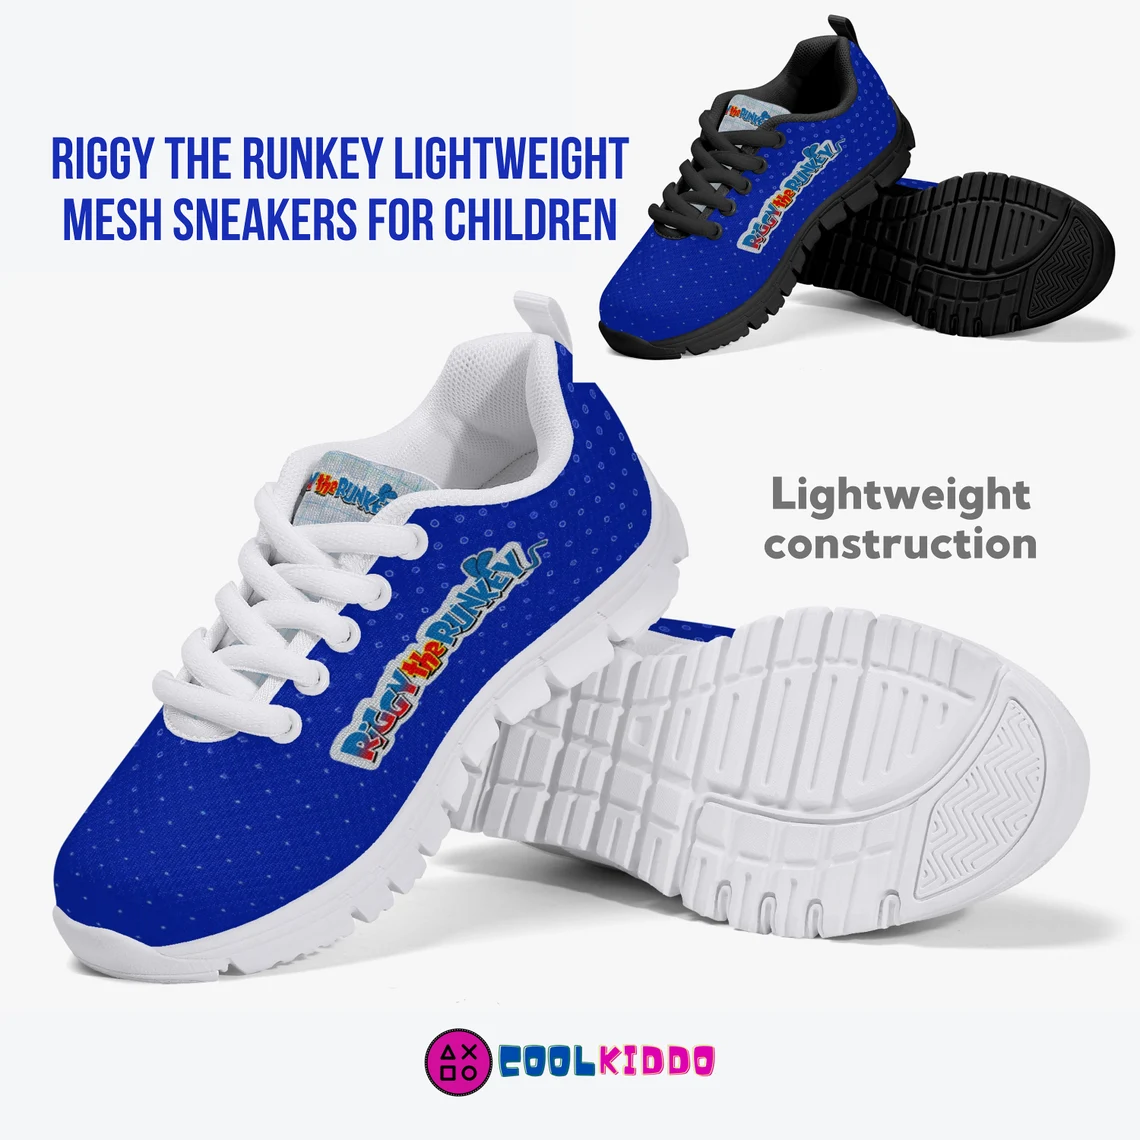 Personalized RiGGY the RUNKEY Lightweight Mesh Sneakers – Characters Printed Shoes for All Seasons Cool Kiddo 14